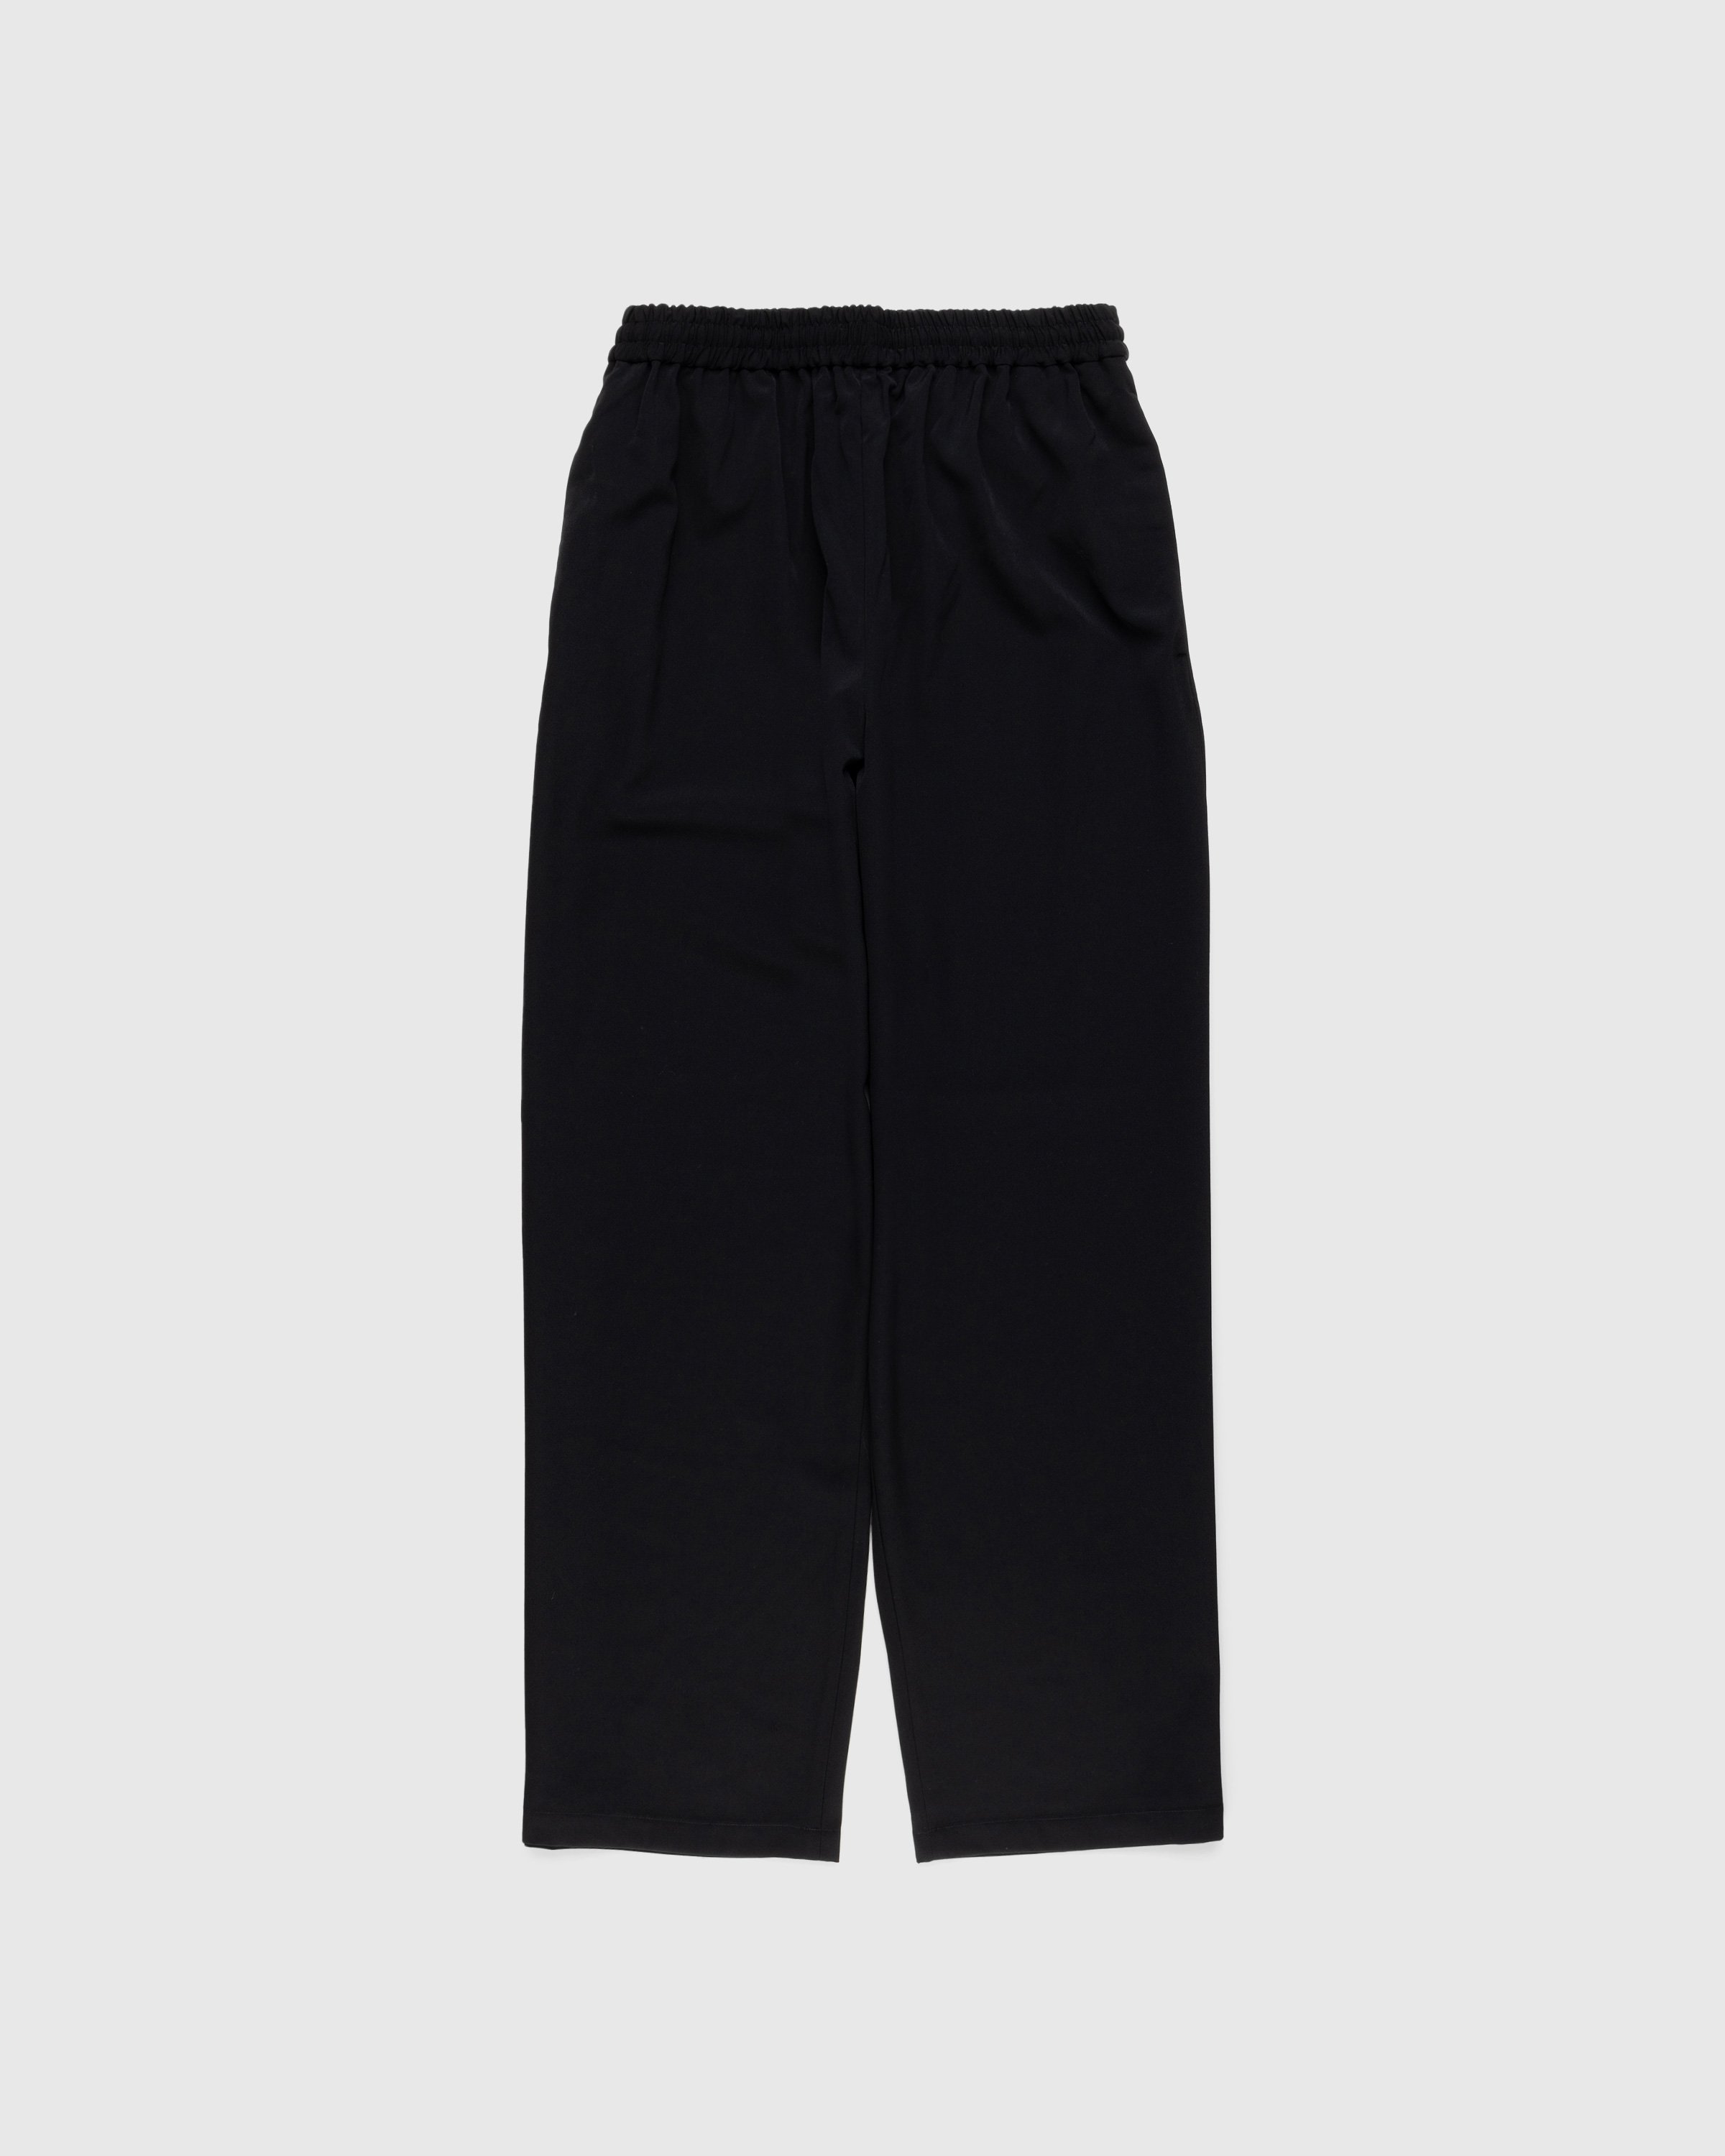 Acne Studios - Relaxed Fit Trousers Black - Clothing - Black - Image 1